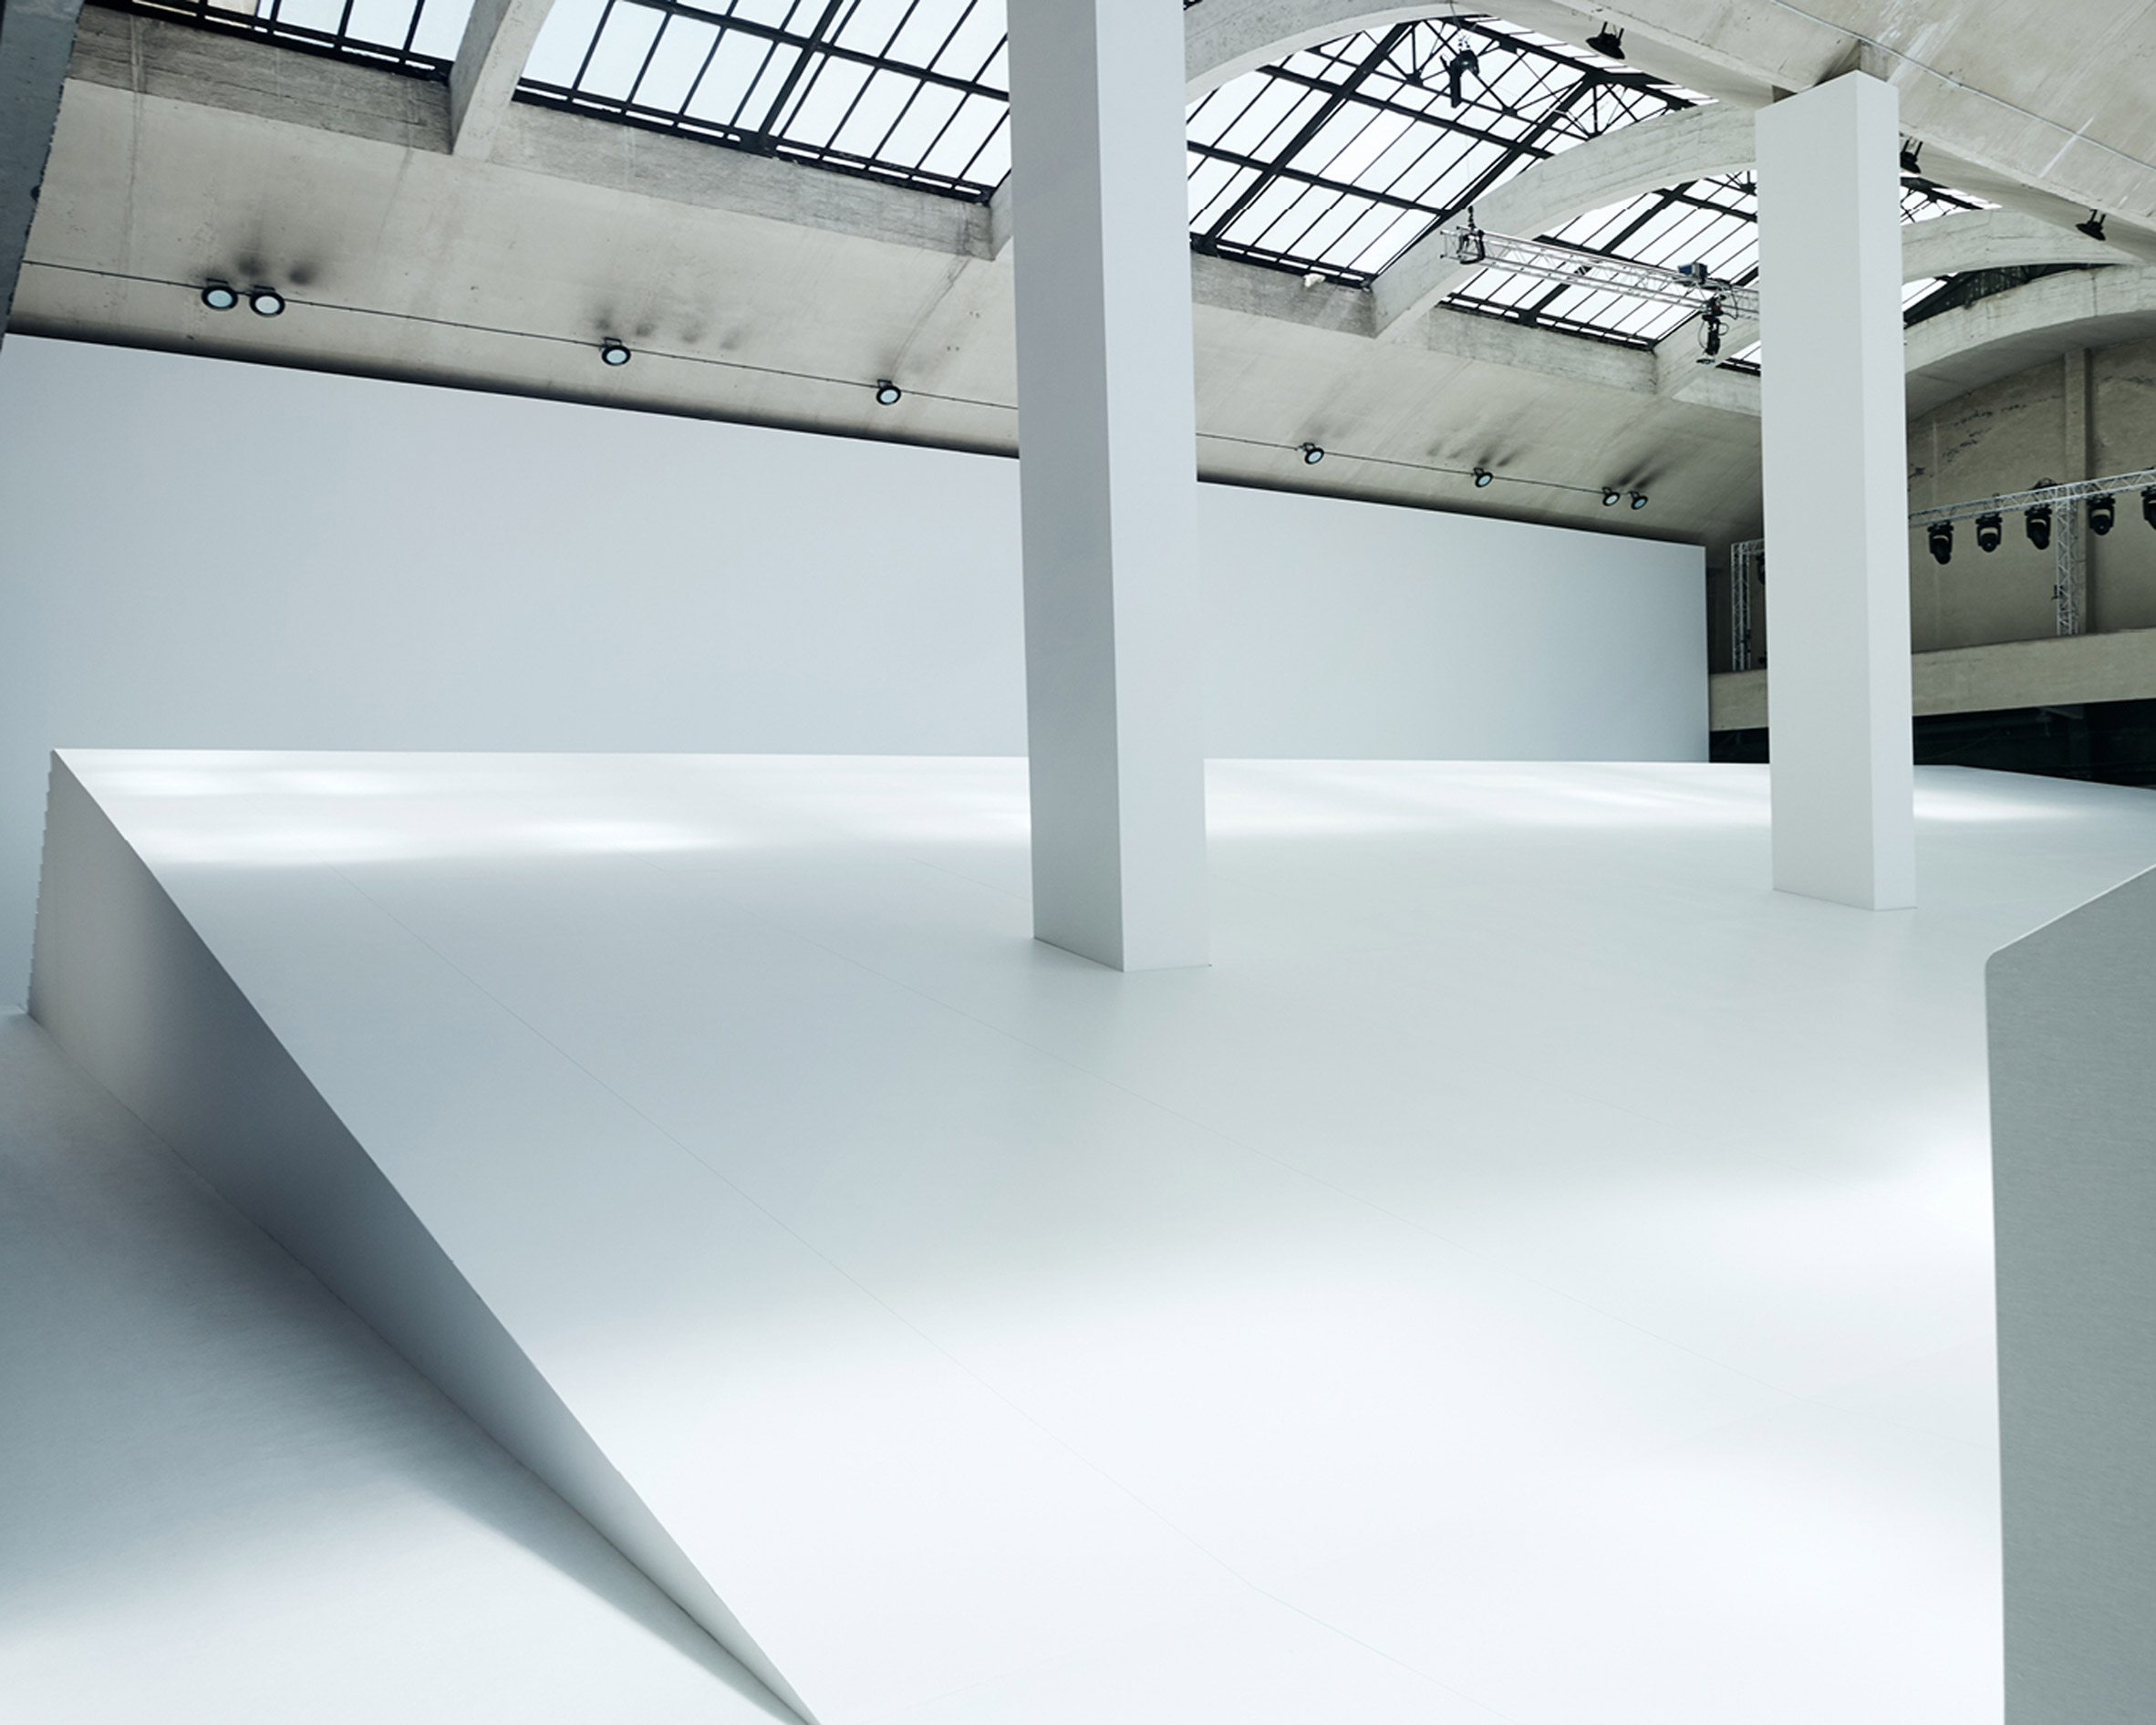 Image of Loewe's show space which was a giant ramp